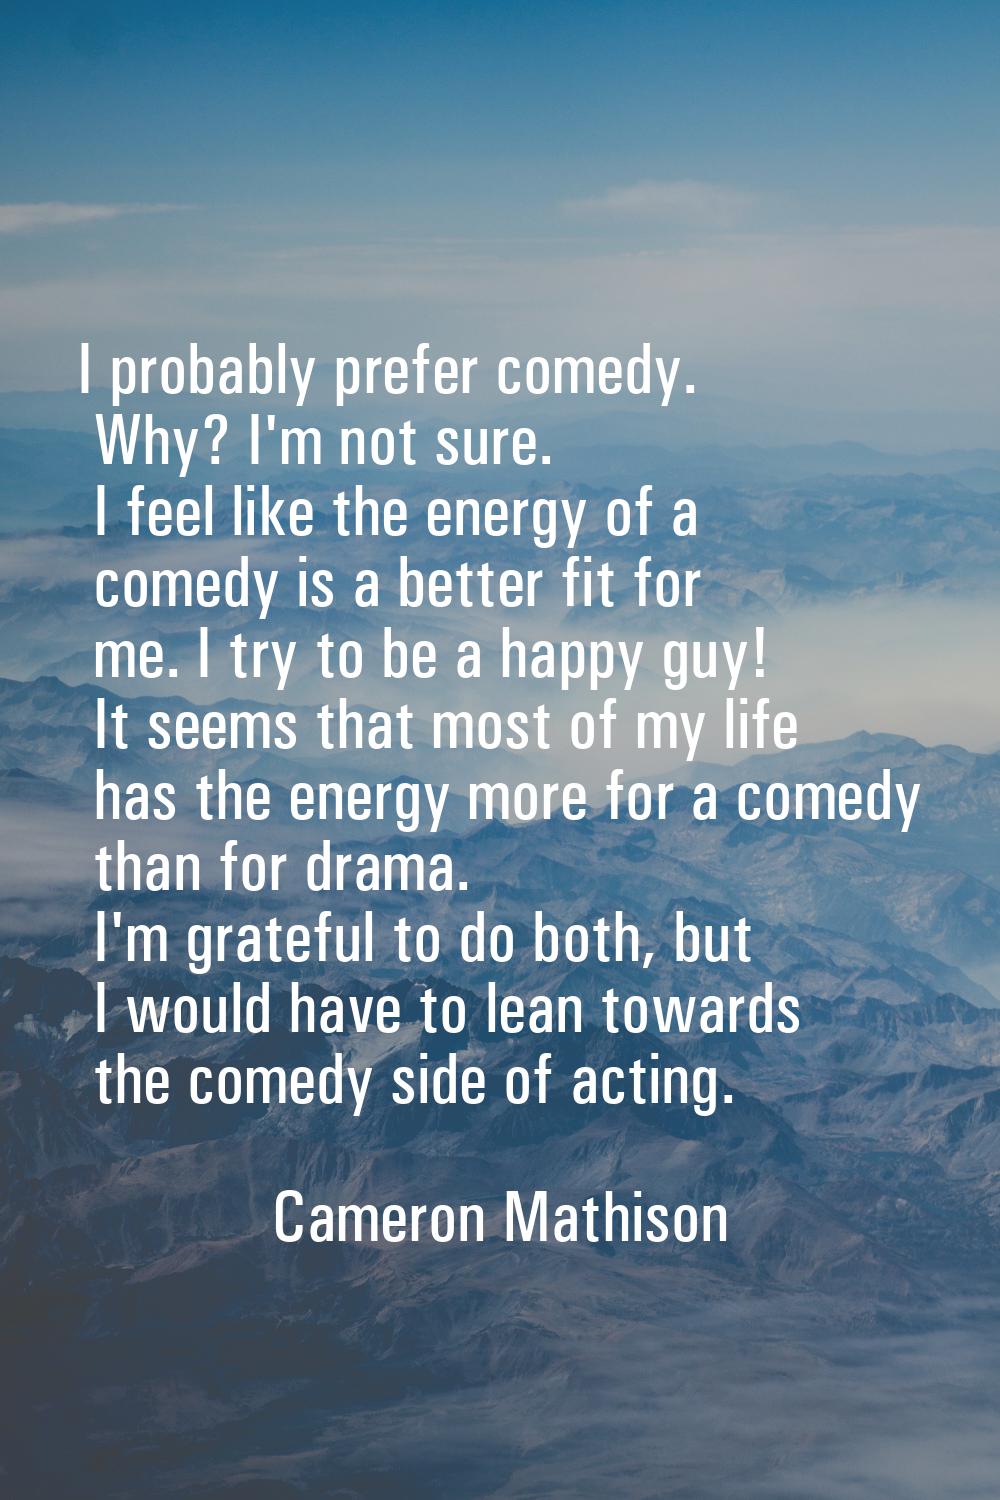 I probably prefer comedy. Why? I'm not sure. I feel like the energy of a comedy is a better fit for